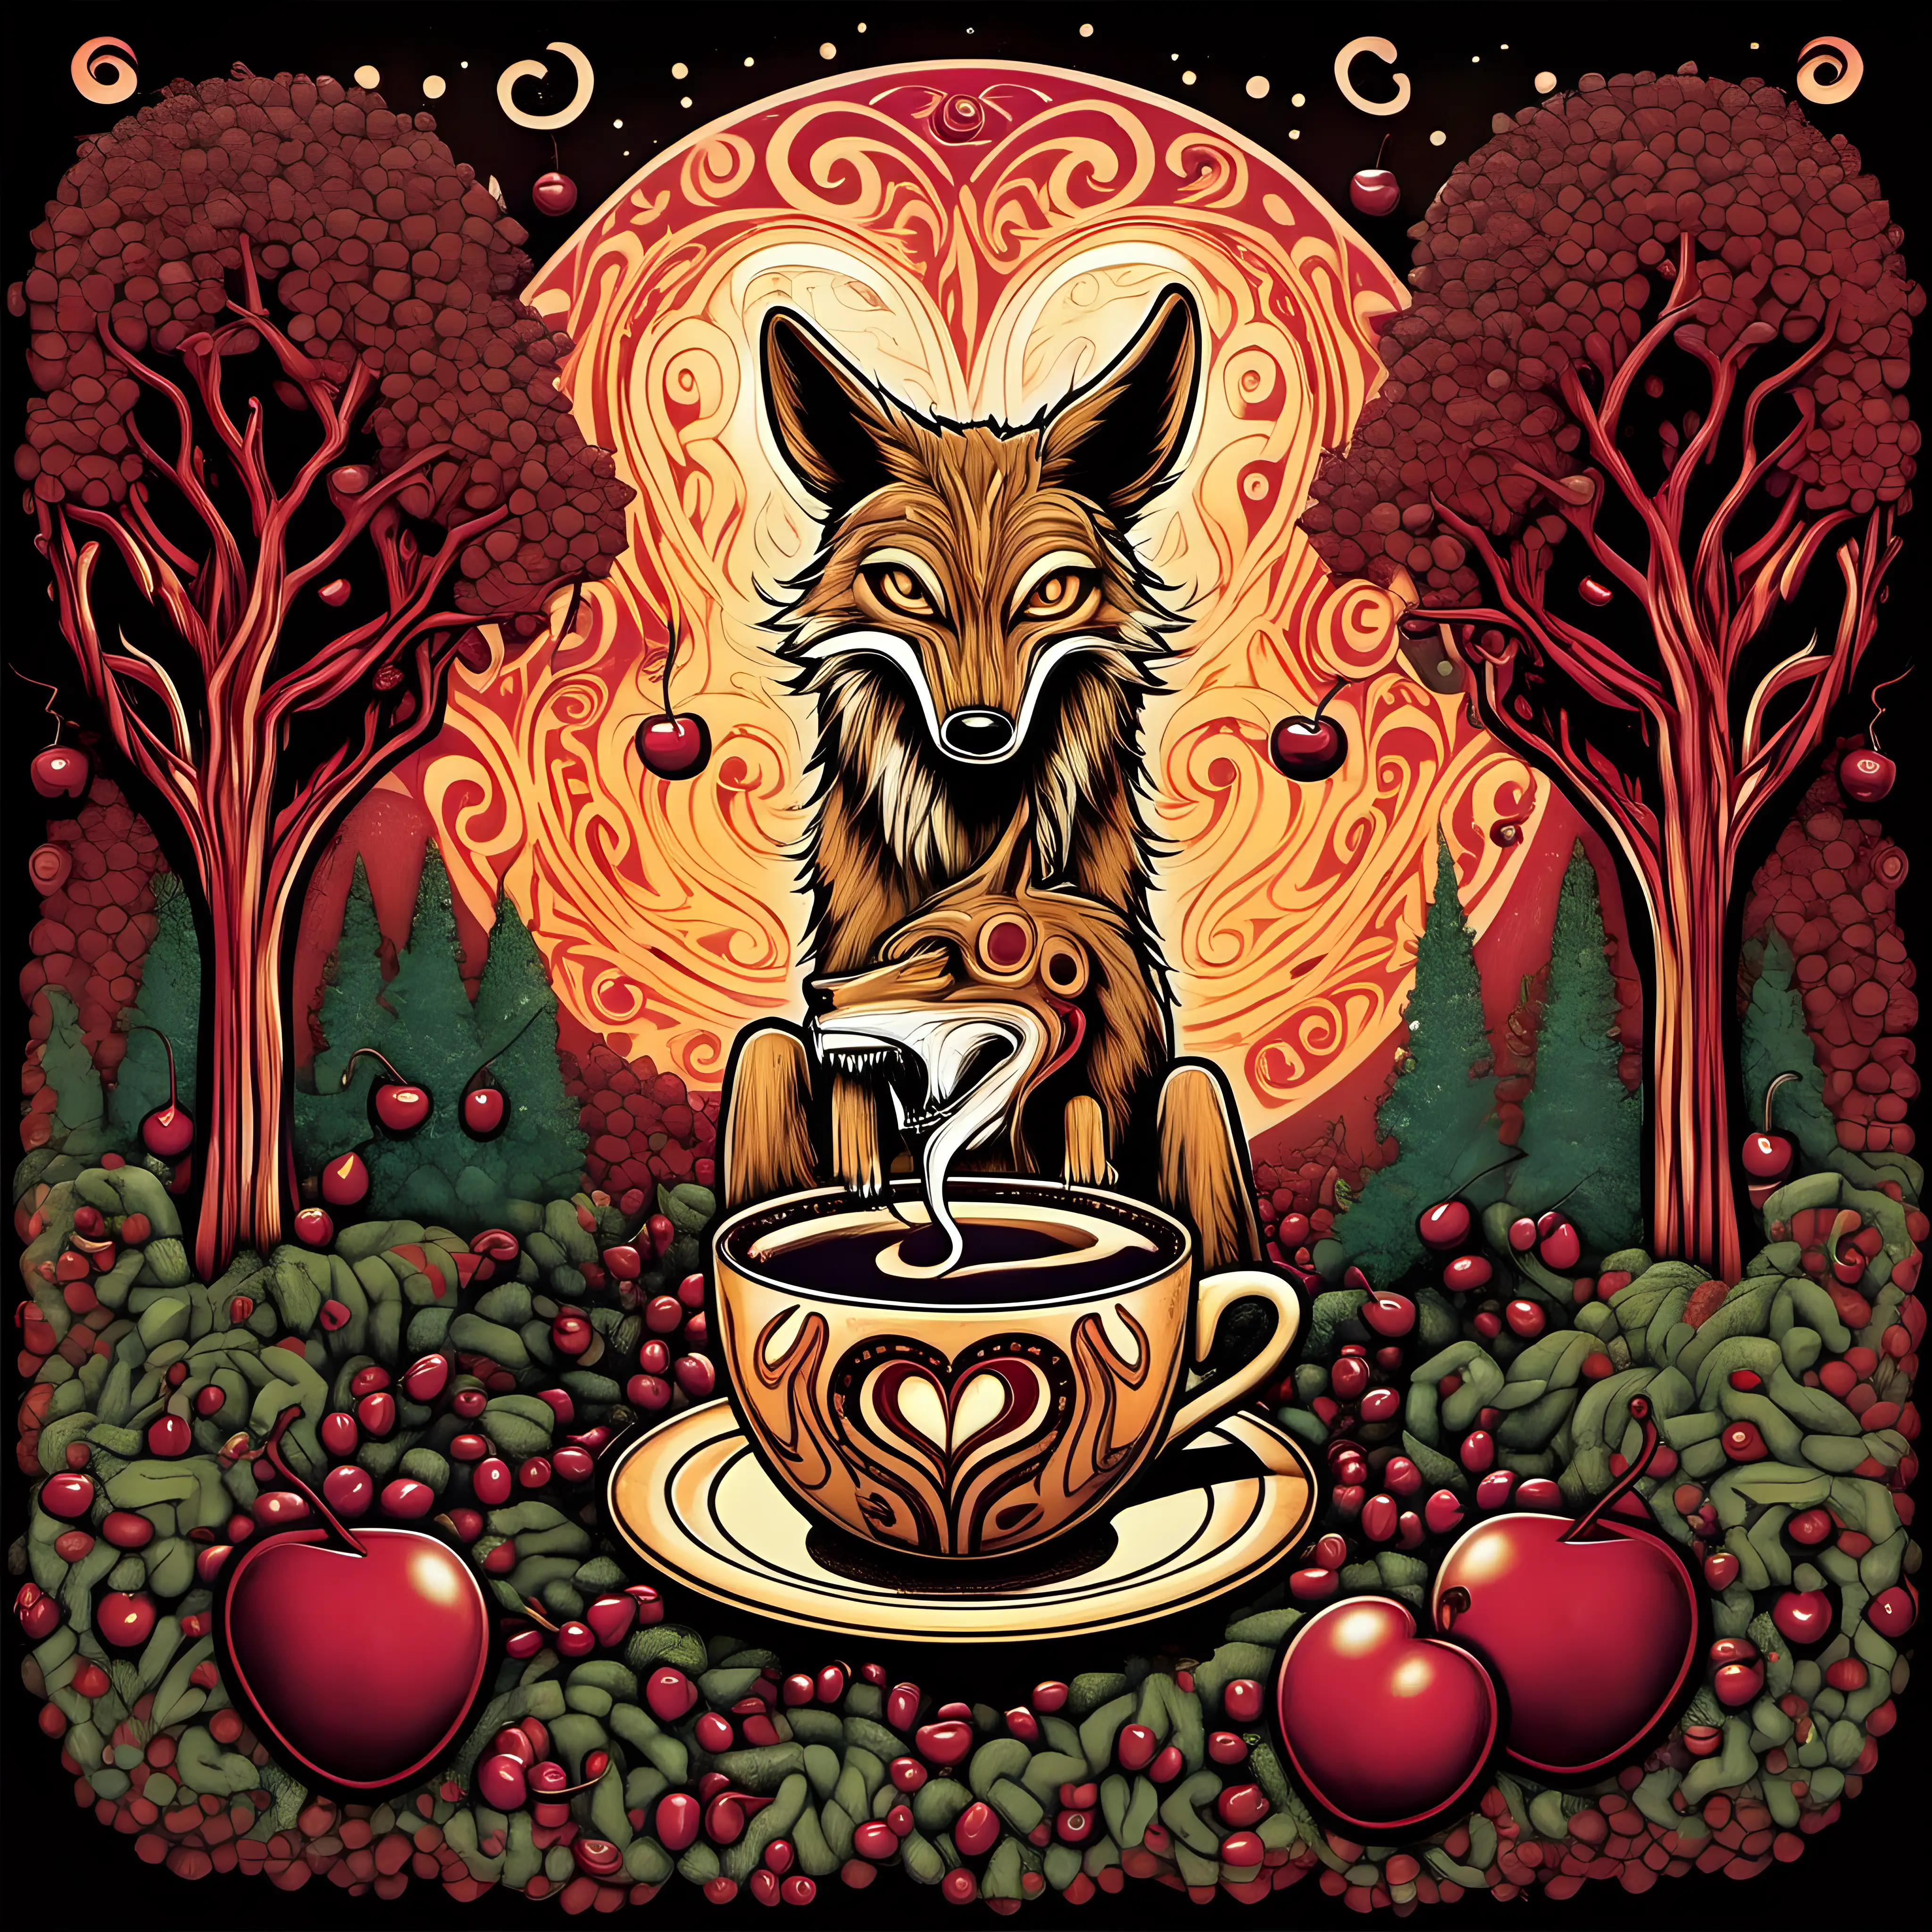 Hichol art. A Coyote in love with a coffee cup  in an astral trip. There are icon depictions of coffee trees with ripe cherries. 